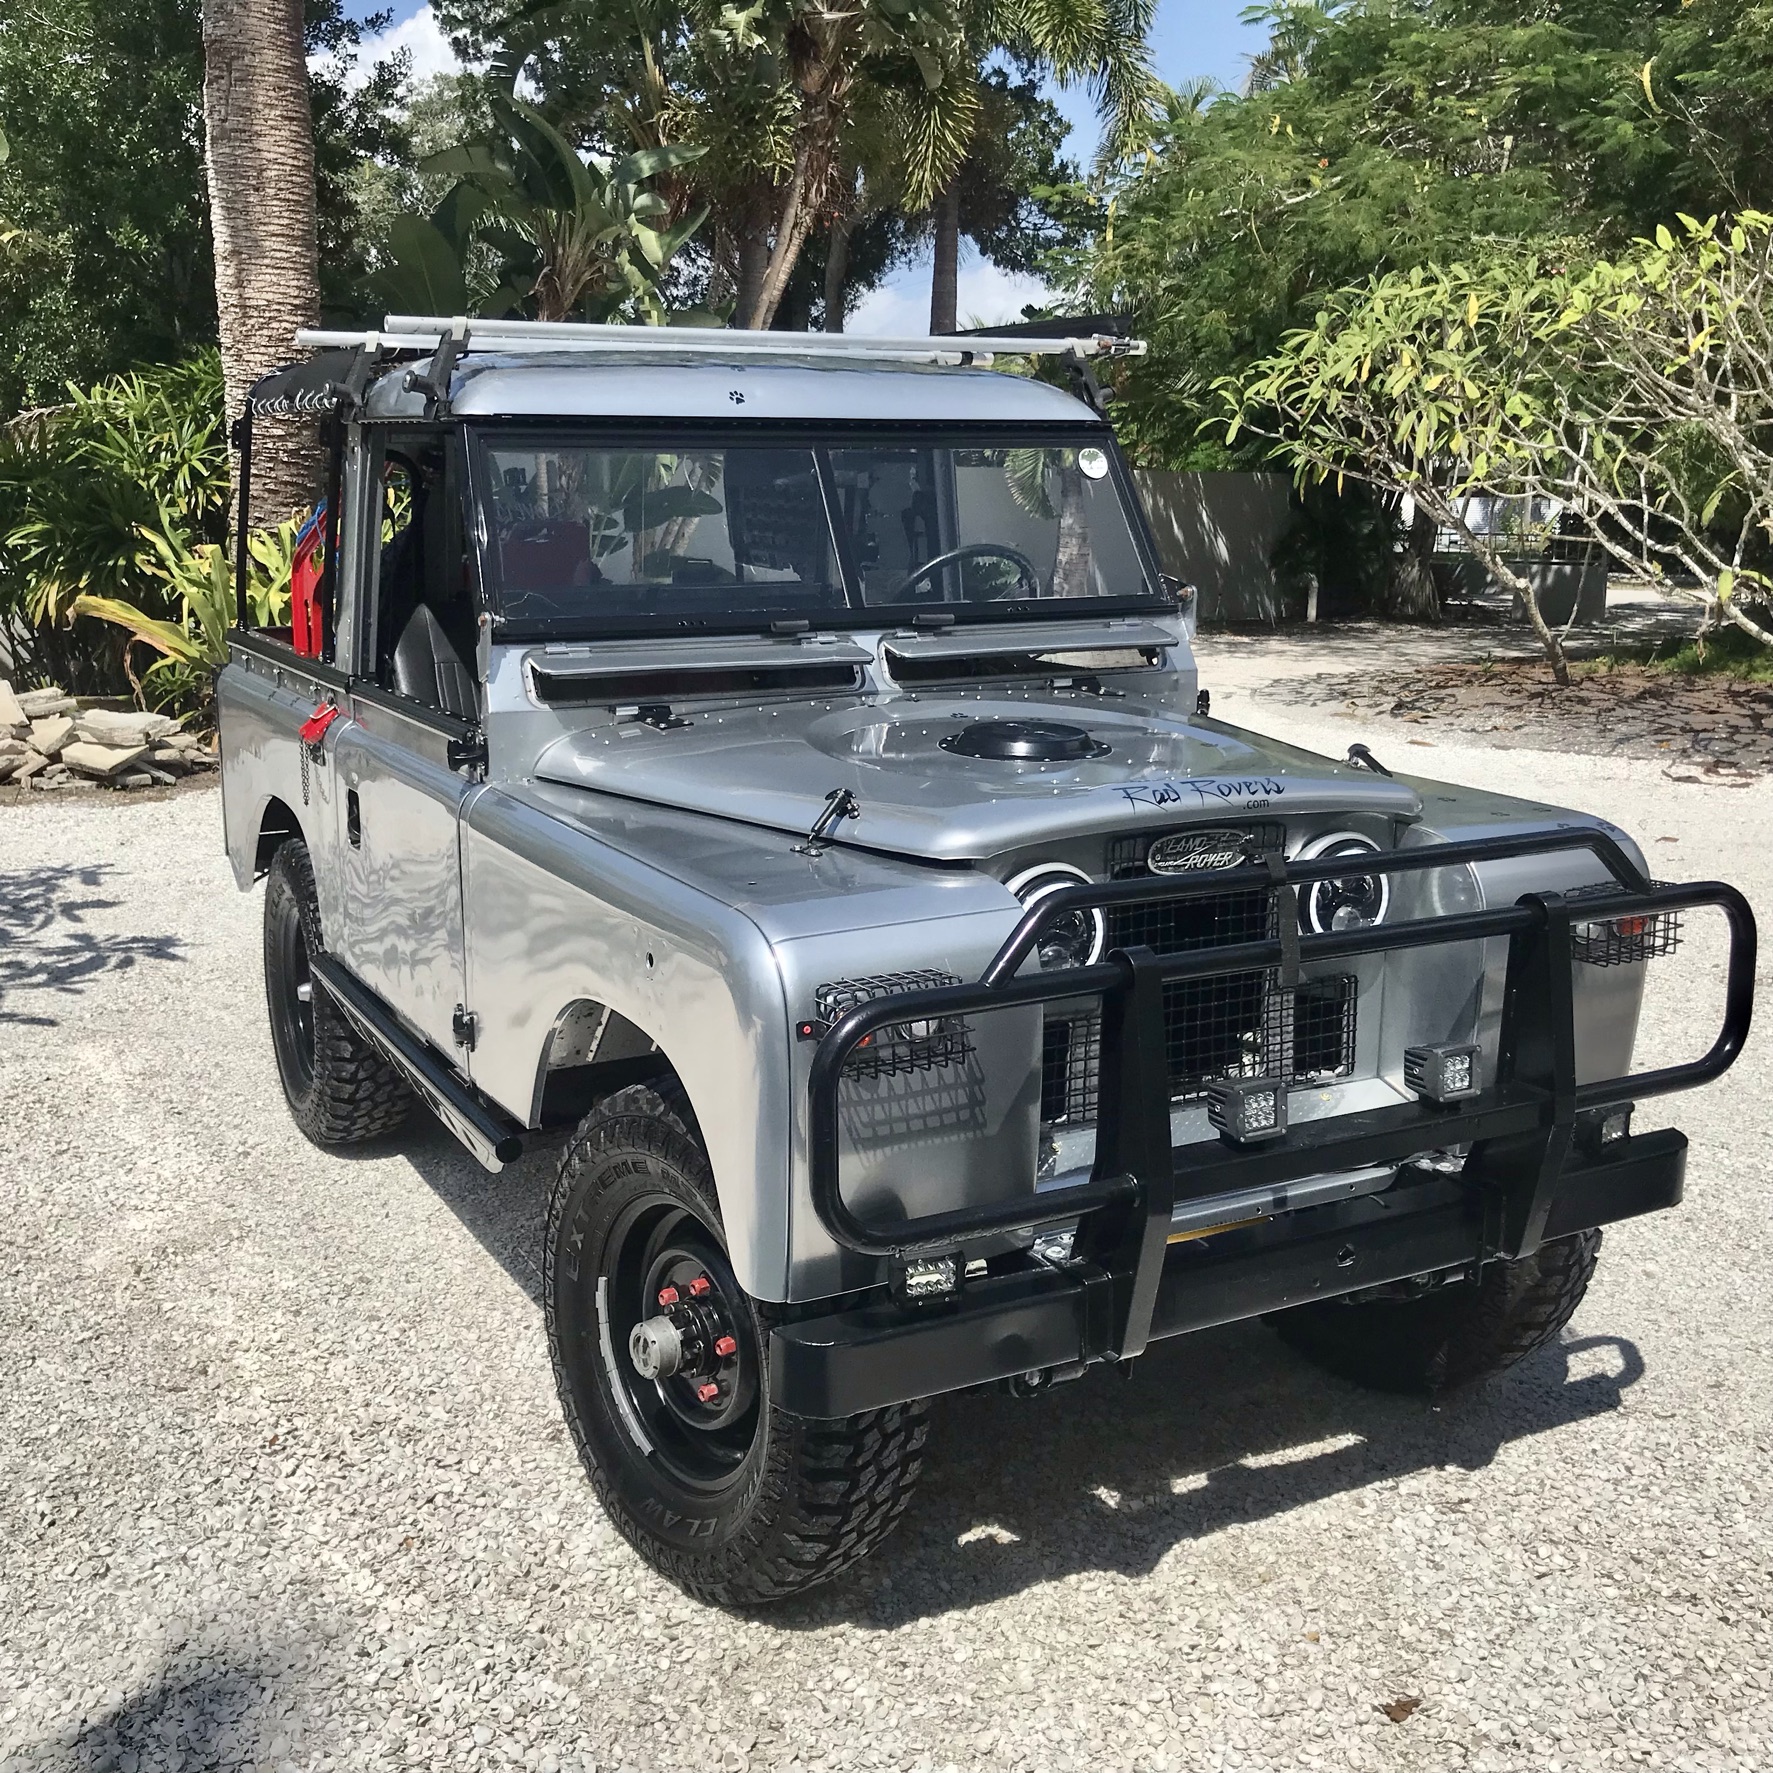 Our Mission: Restore & Build Classic Land Rovers to Your Unique